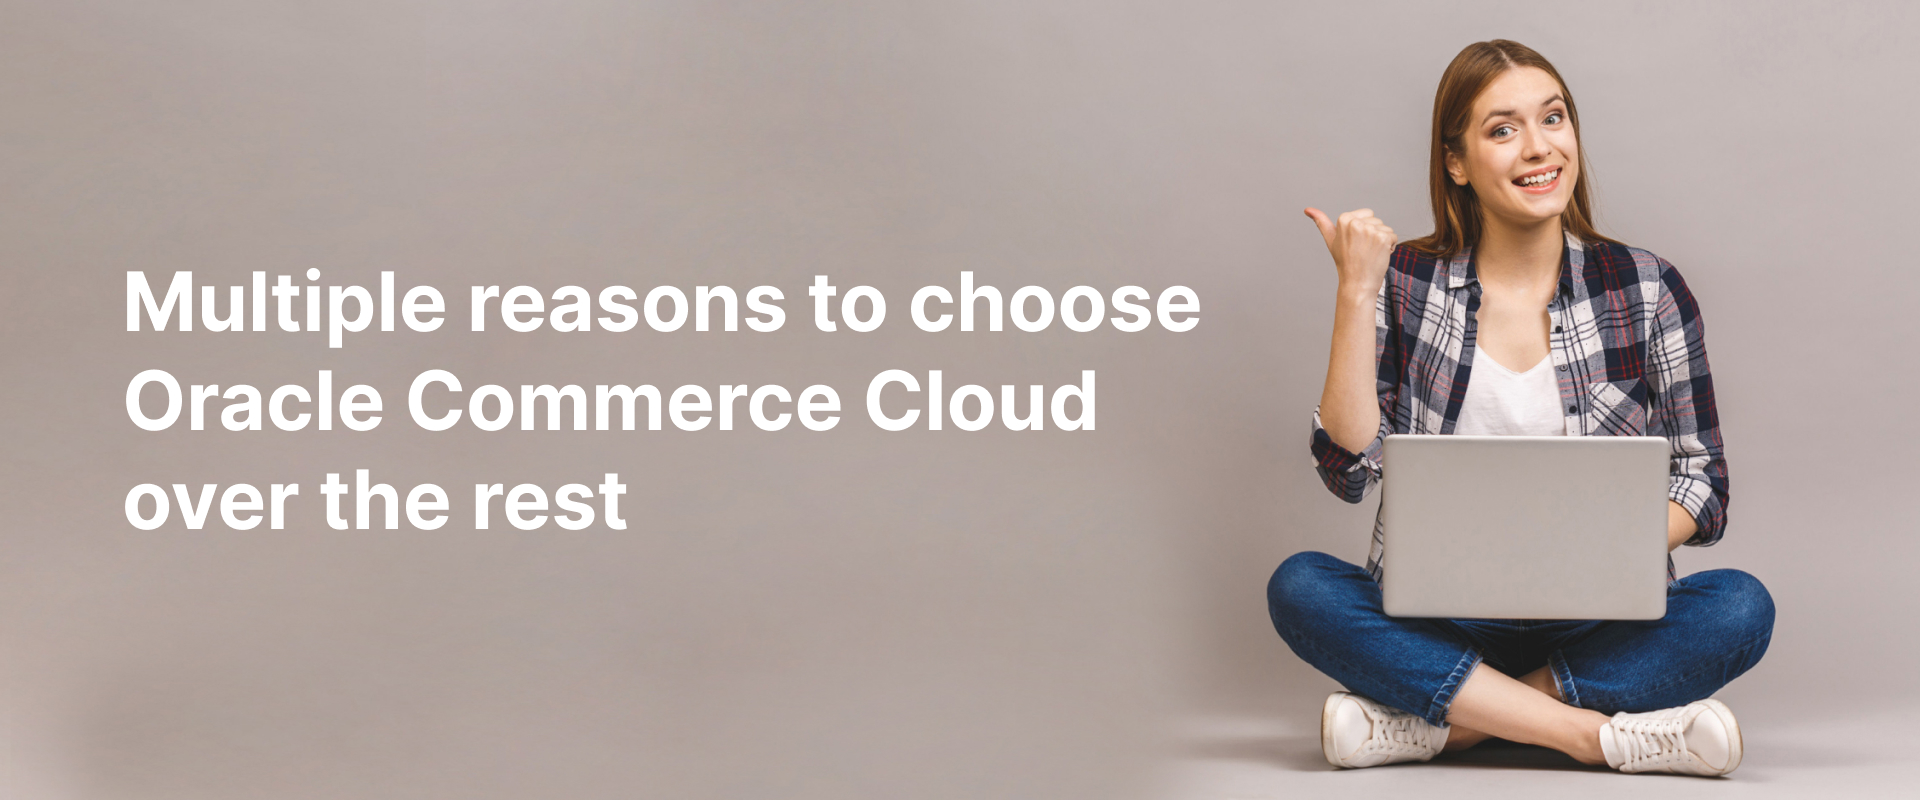 Multiple reasons to choose Oracle Commerce Cloud over the rest